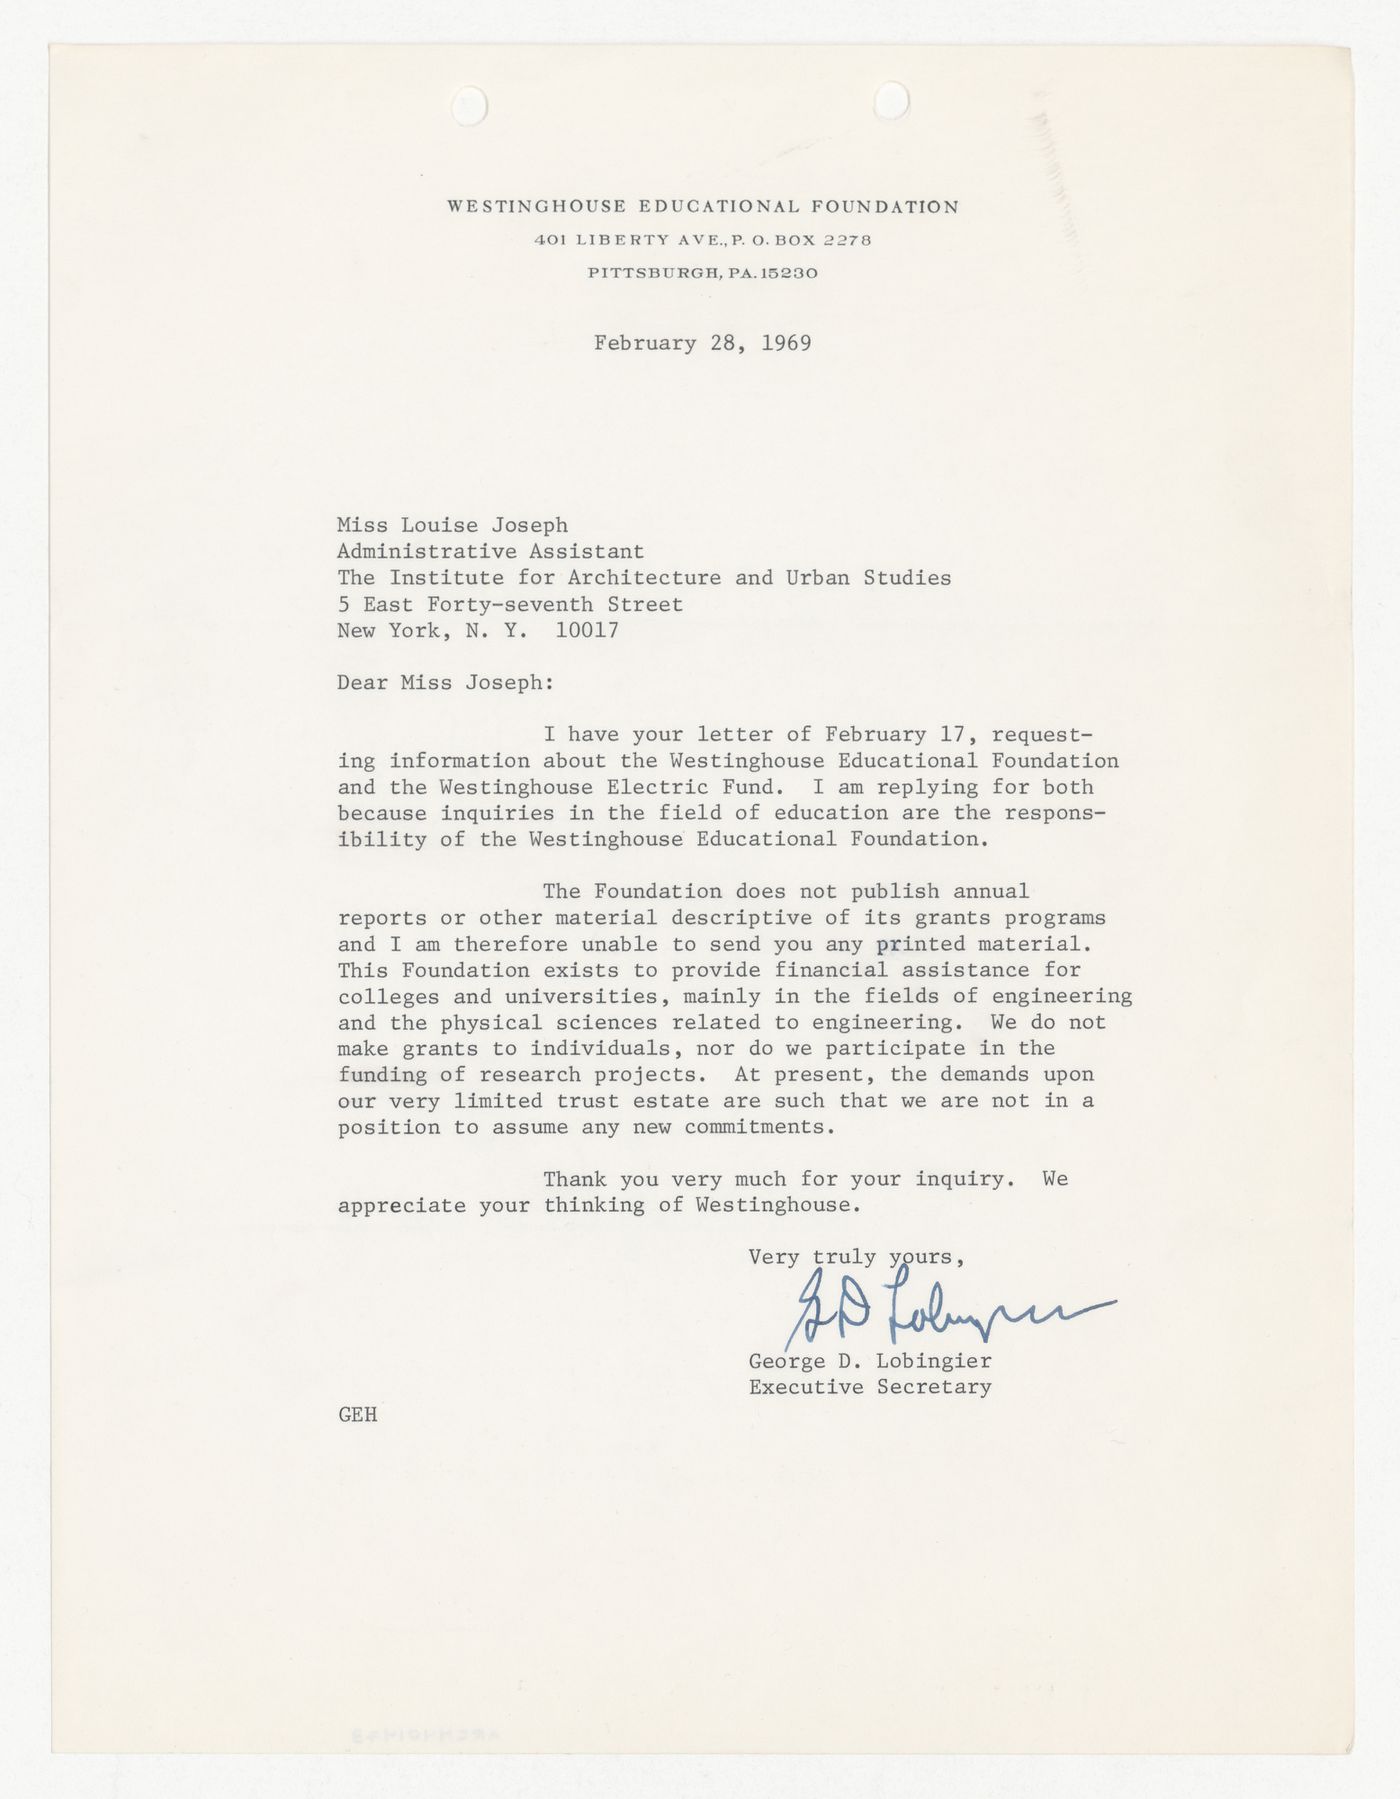 Letter from George D. Lobingier to Louise Joseph about grant programs operated by the Westinghouse Educational Foundation